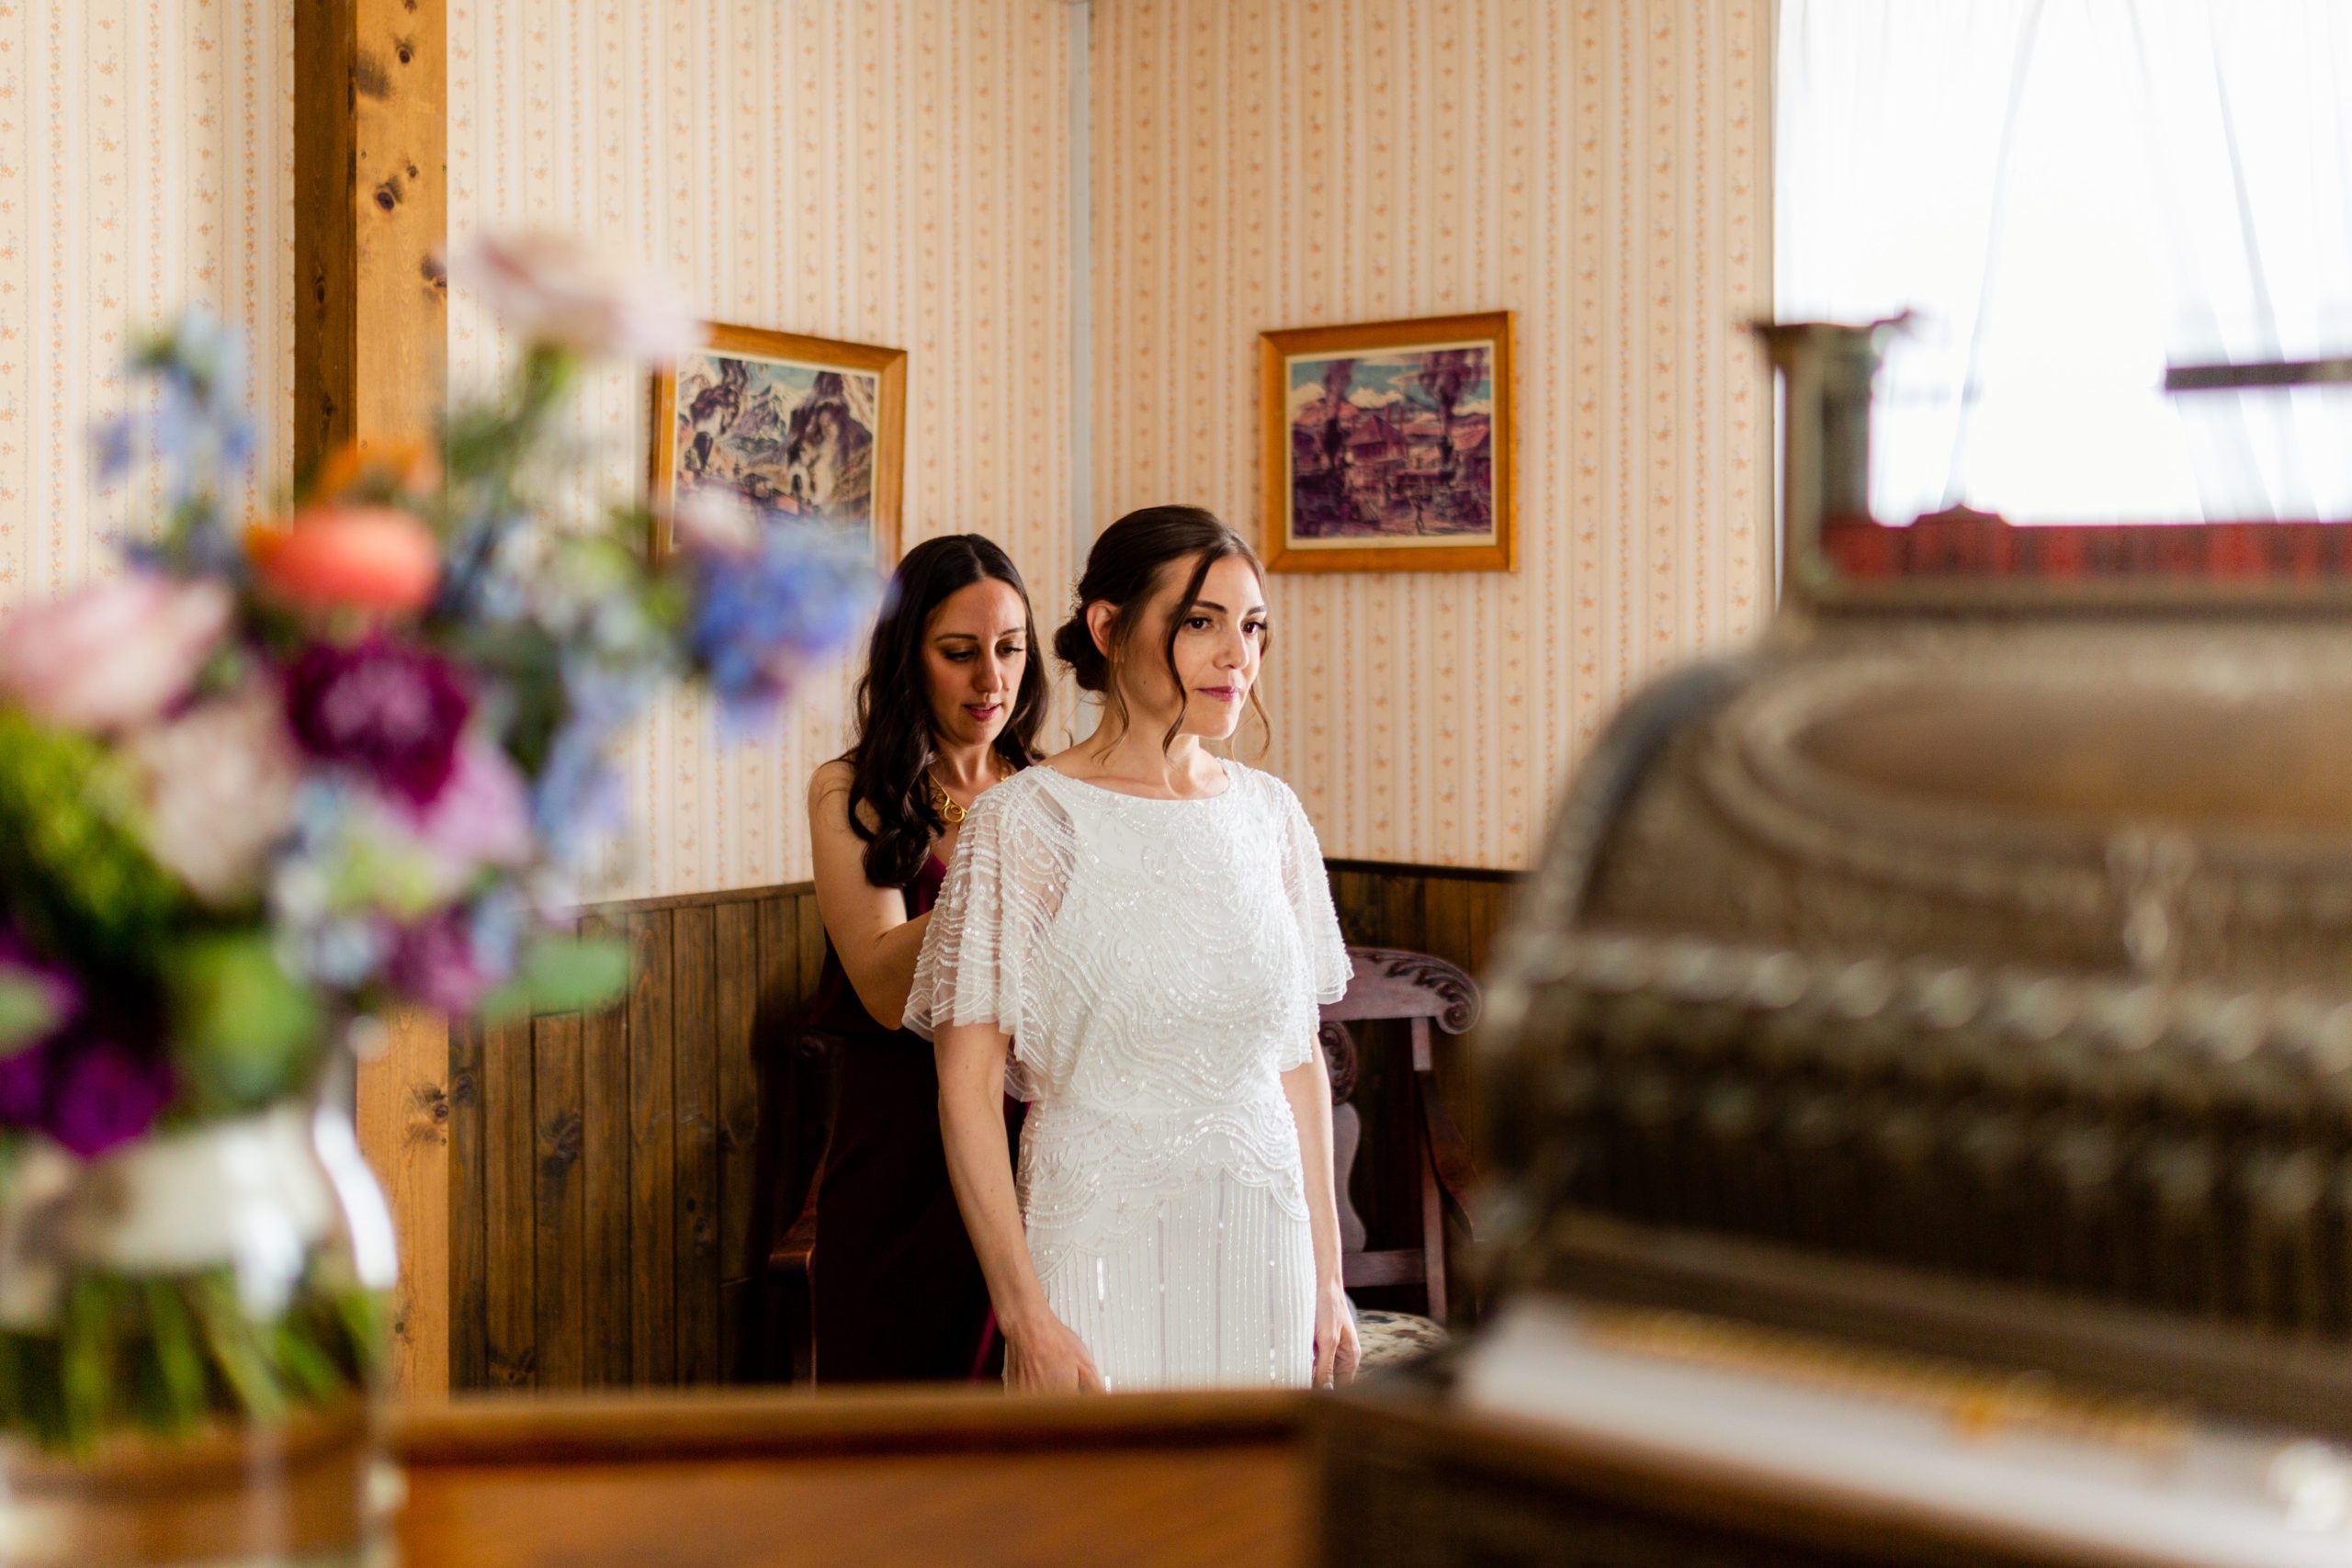 Bride getting ready at Bluebird Lodge before wedding ceremony at Gold Hill Inn Boulder